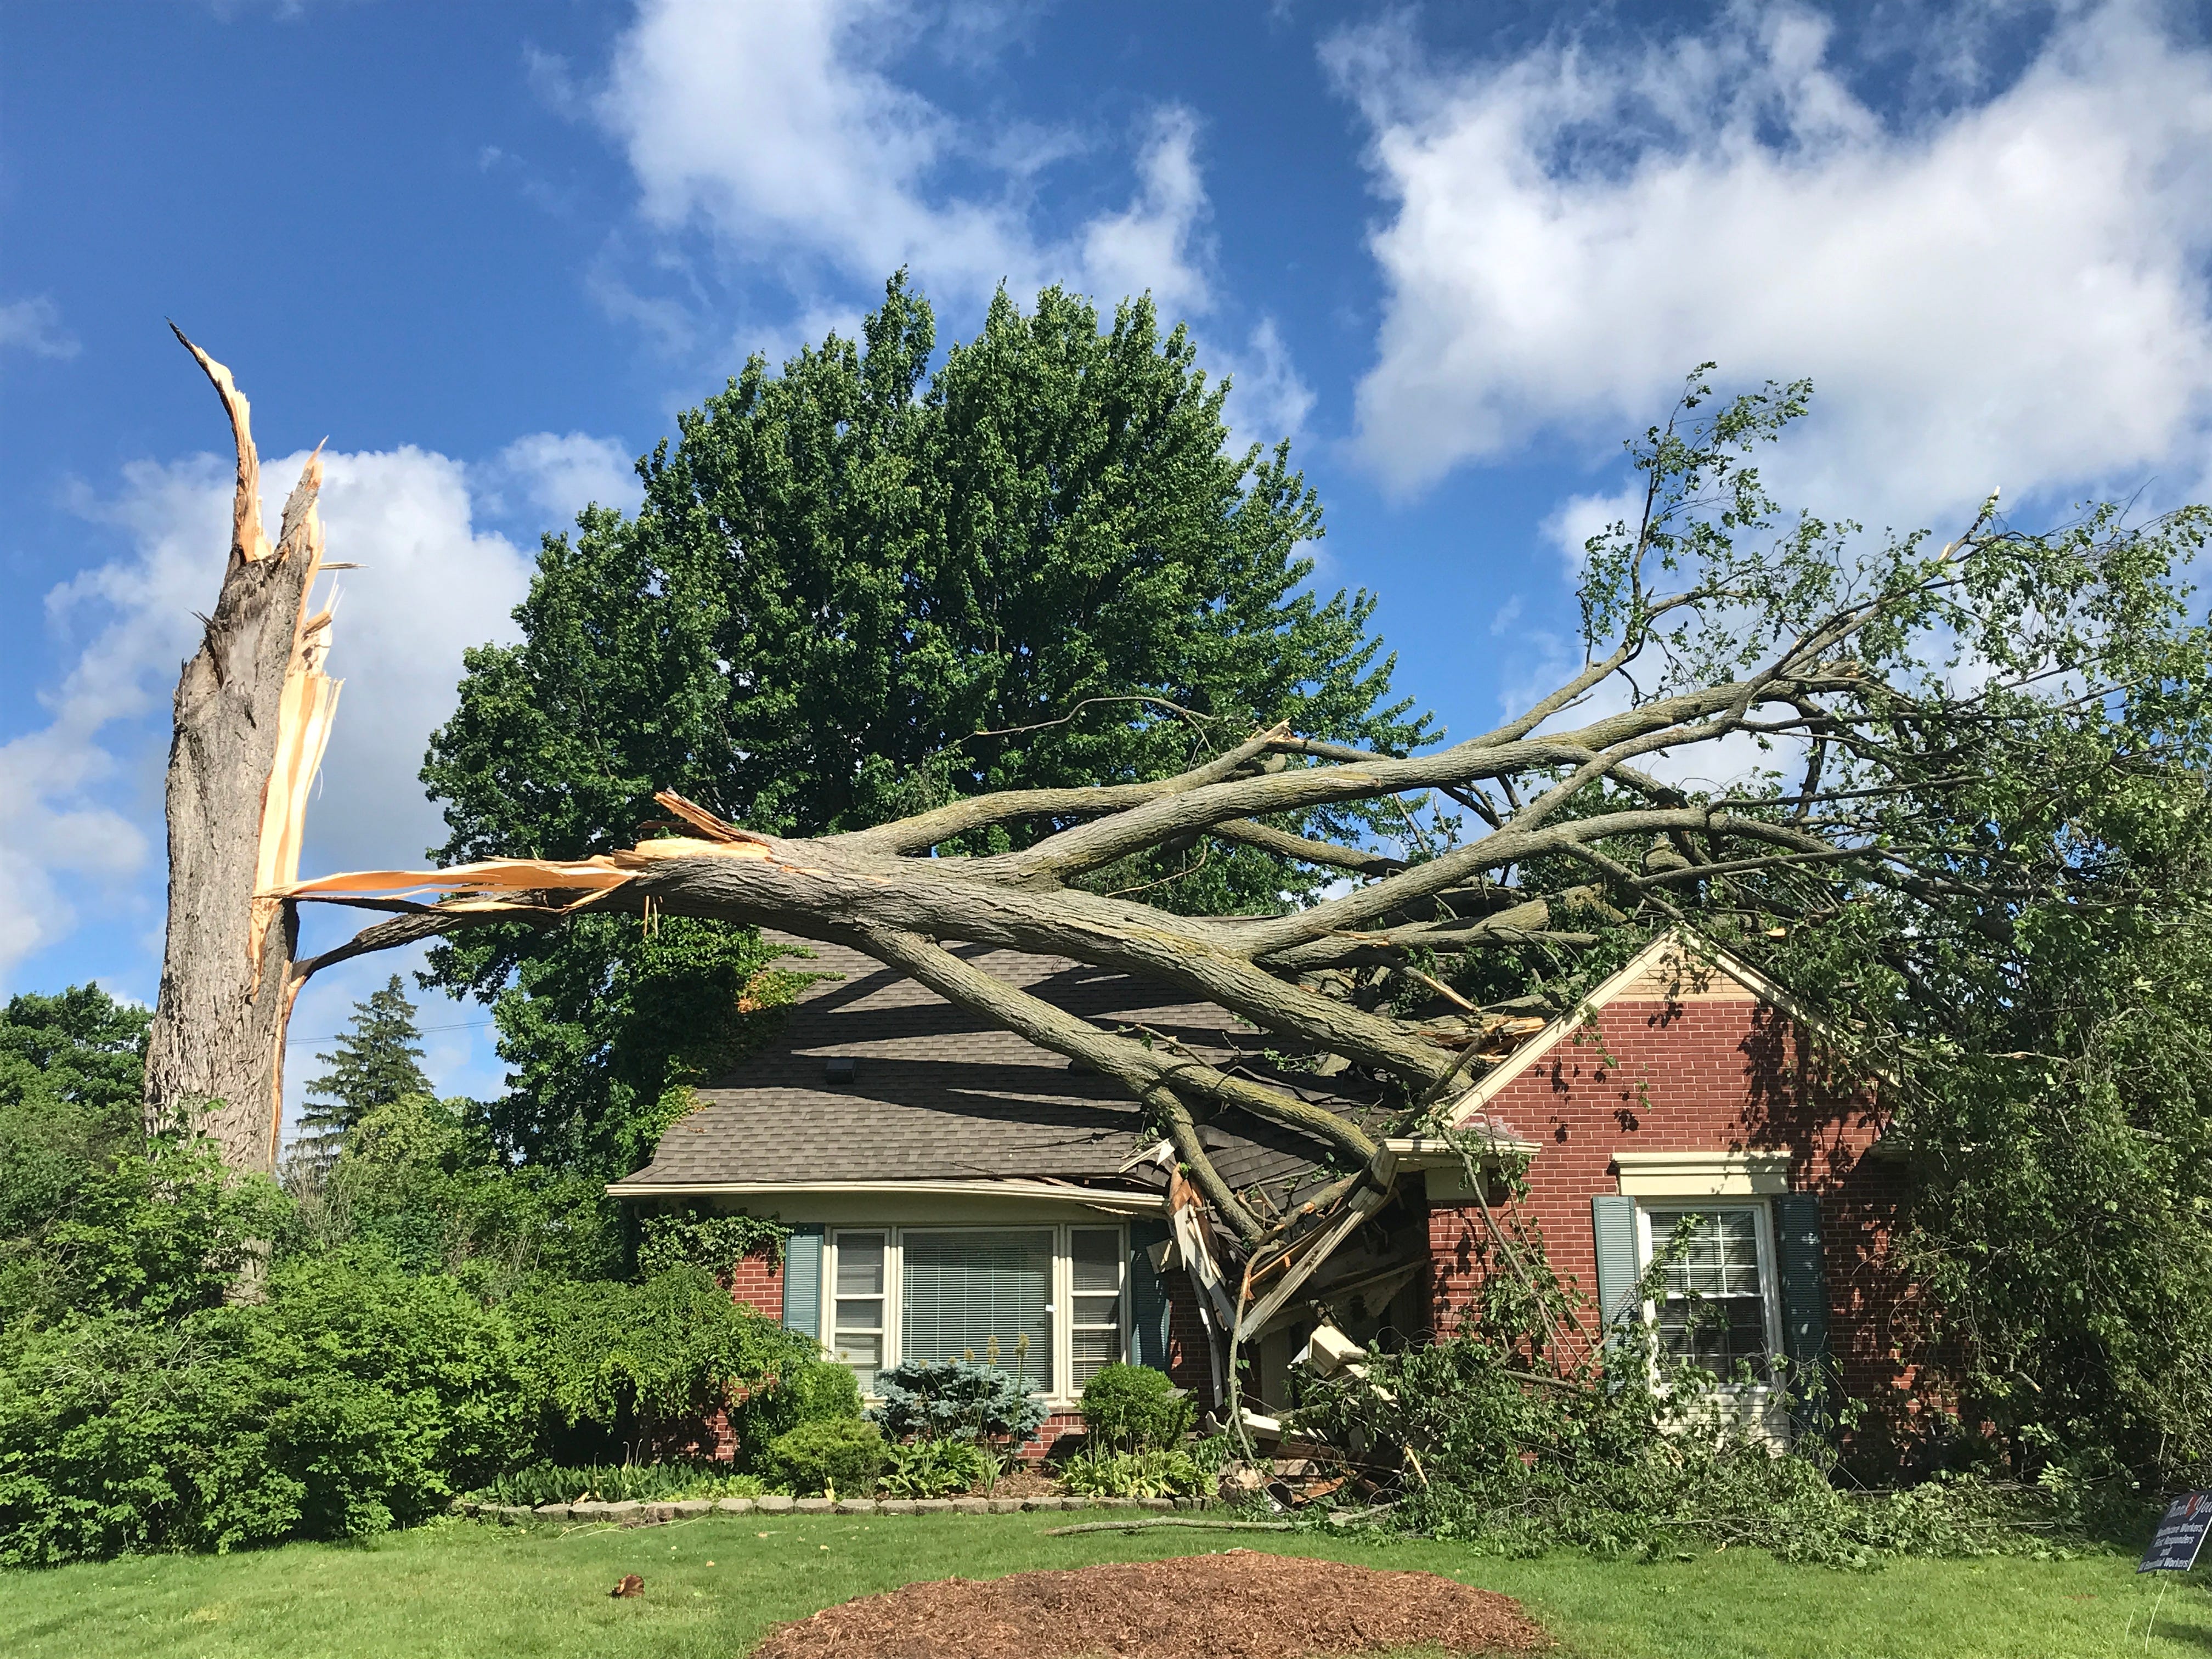 High winds caused a neighbor's tree to fall on Rebecca and Paul Tomezak's home in Grosse Pointe Woods causing significant damage to the roof. photos taken on Thursday, June 11, 2020.